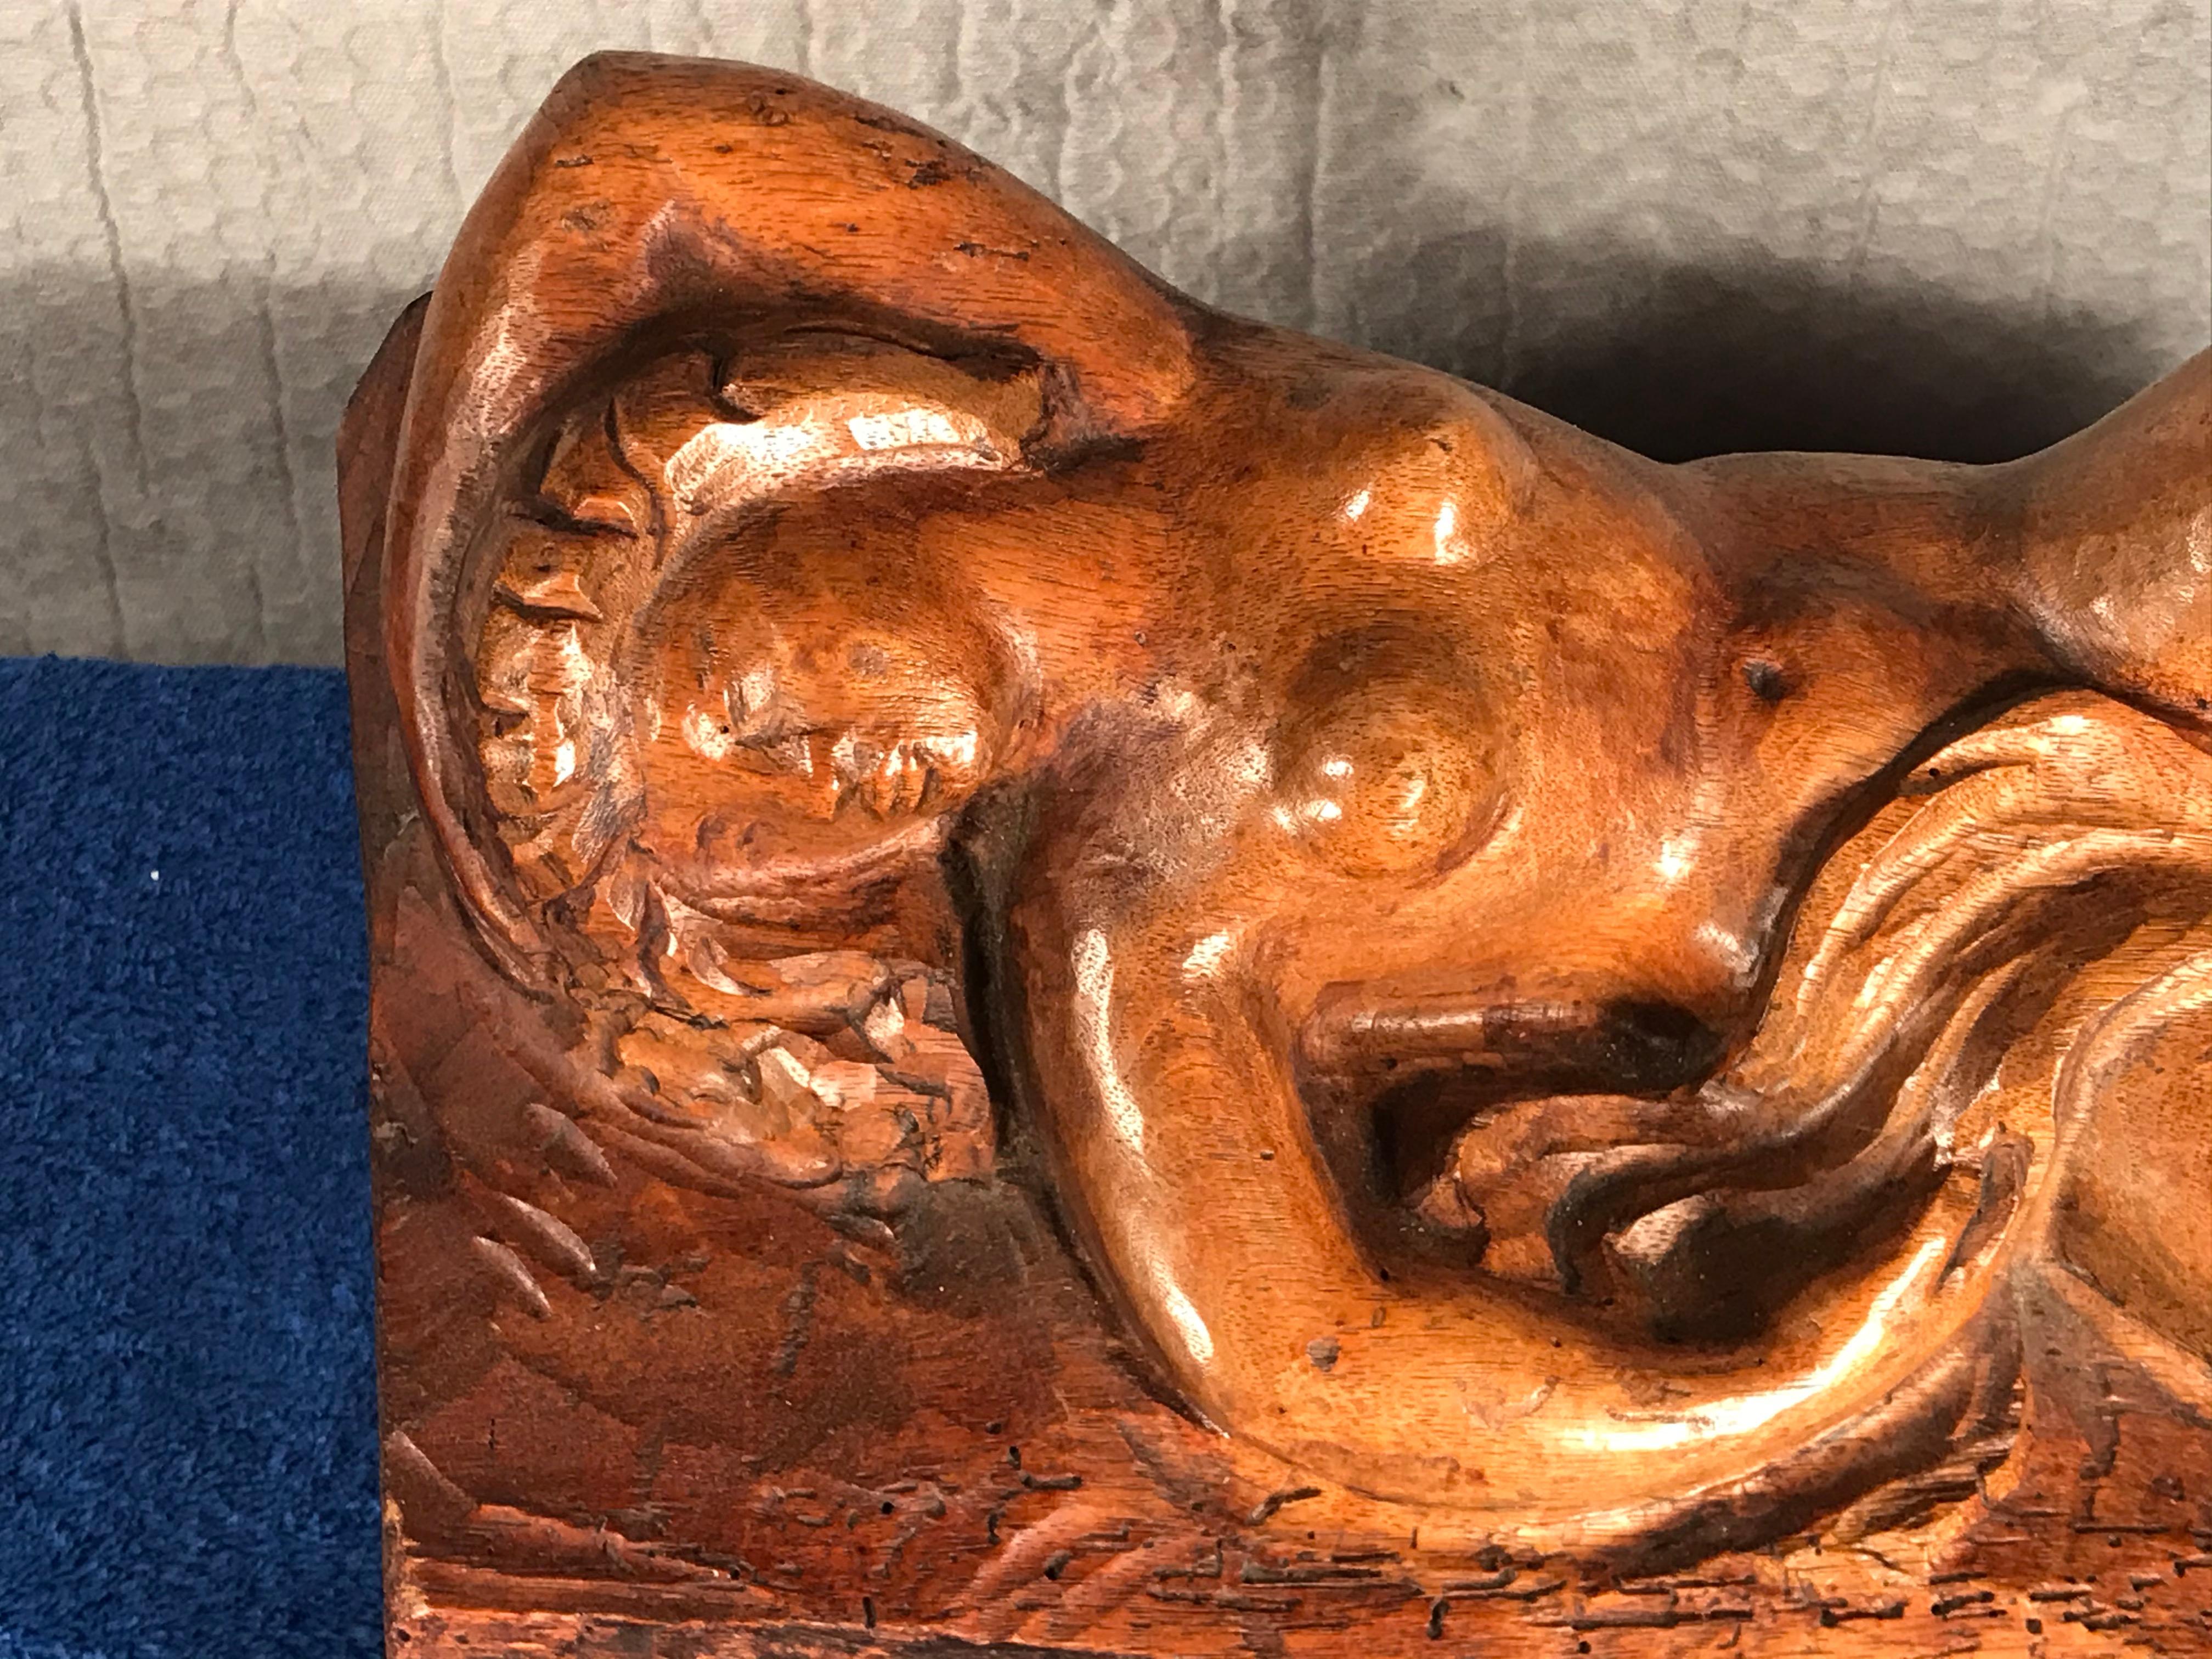 Henri Collomb, French artist (1905-?), “Nu féminin allongé (Lying female nude), walnut hand carved. 
The sculpture has a signature.
It ships from Germany. 

Henri Collomb was born in 1905 and was primarily influenced creatively by the 1920s.